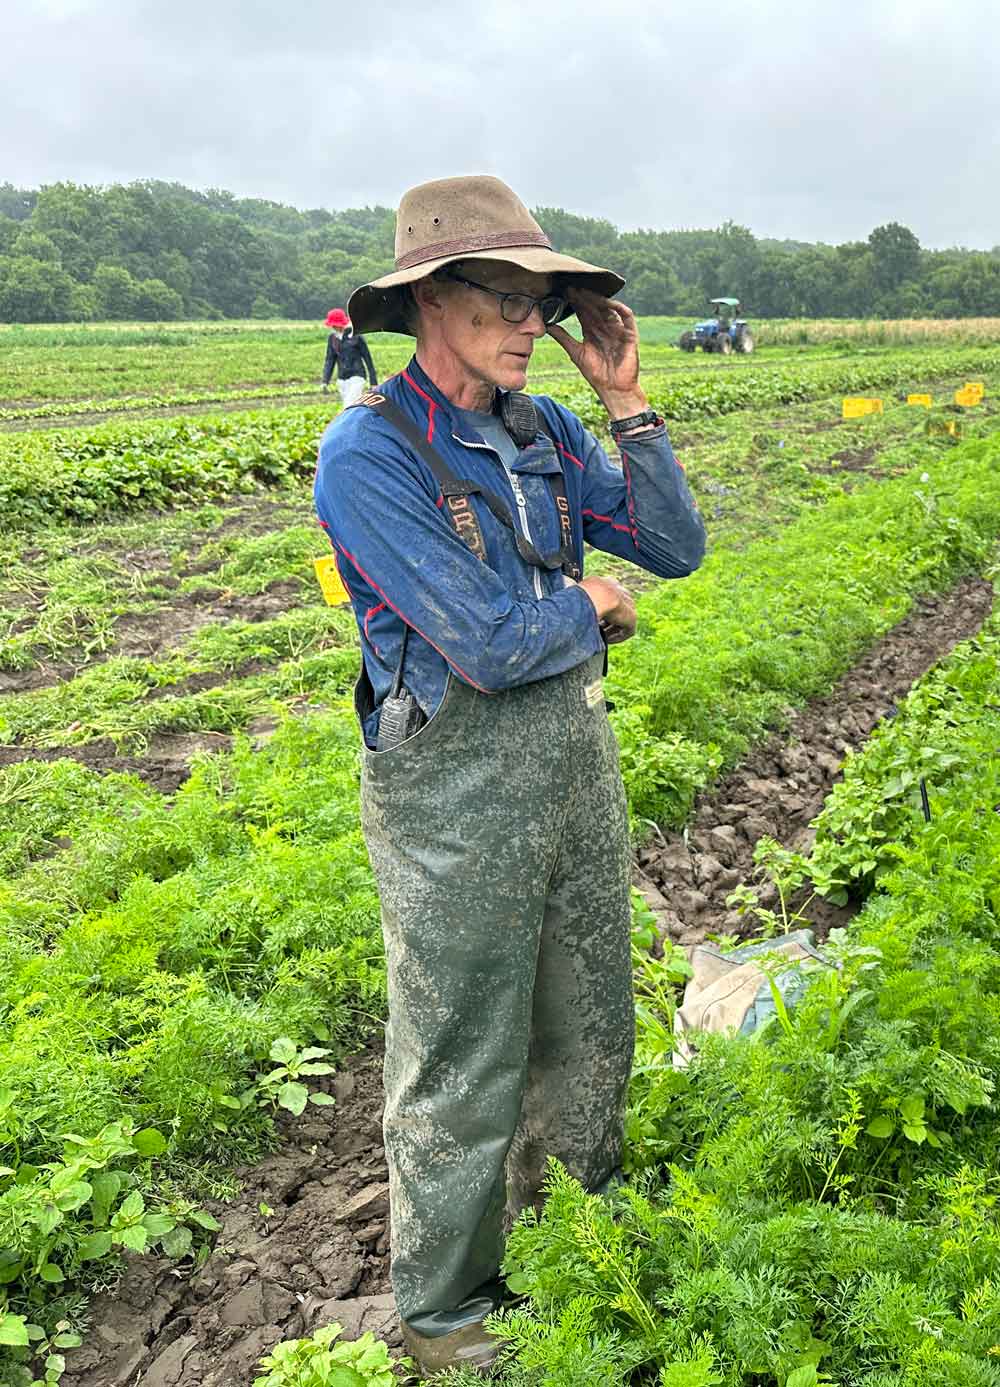 Vermont farmers are trying to save their family farms from catastrophic floods and extreme weather.